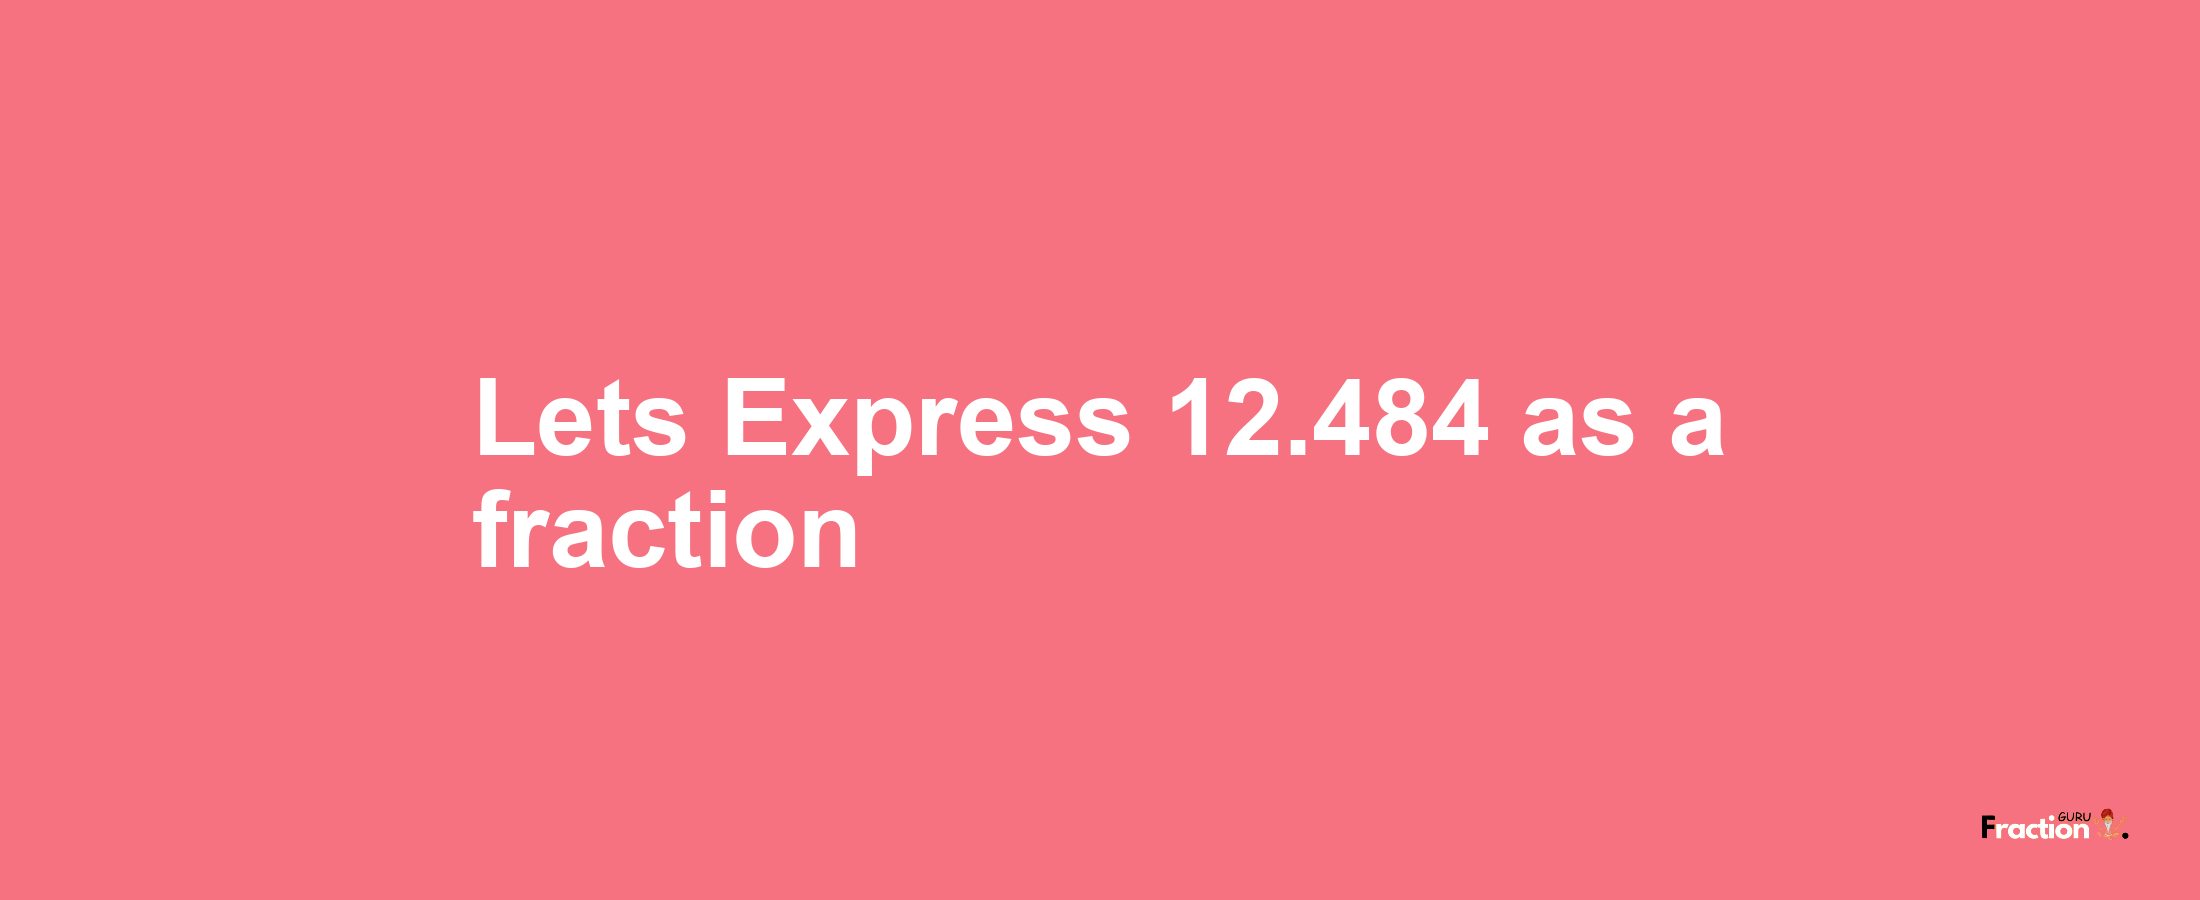 Lets Express 12.484 as afraction